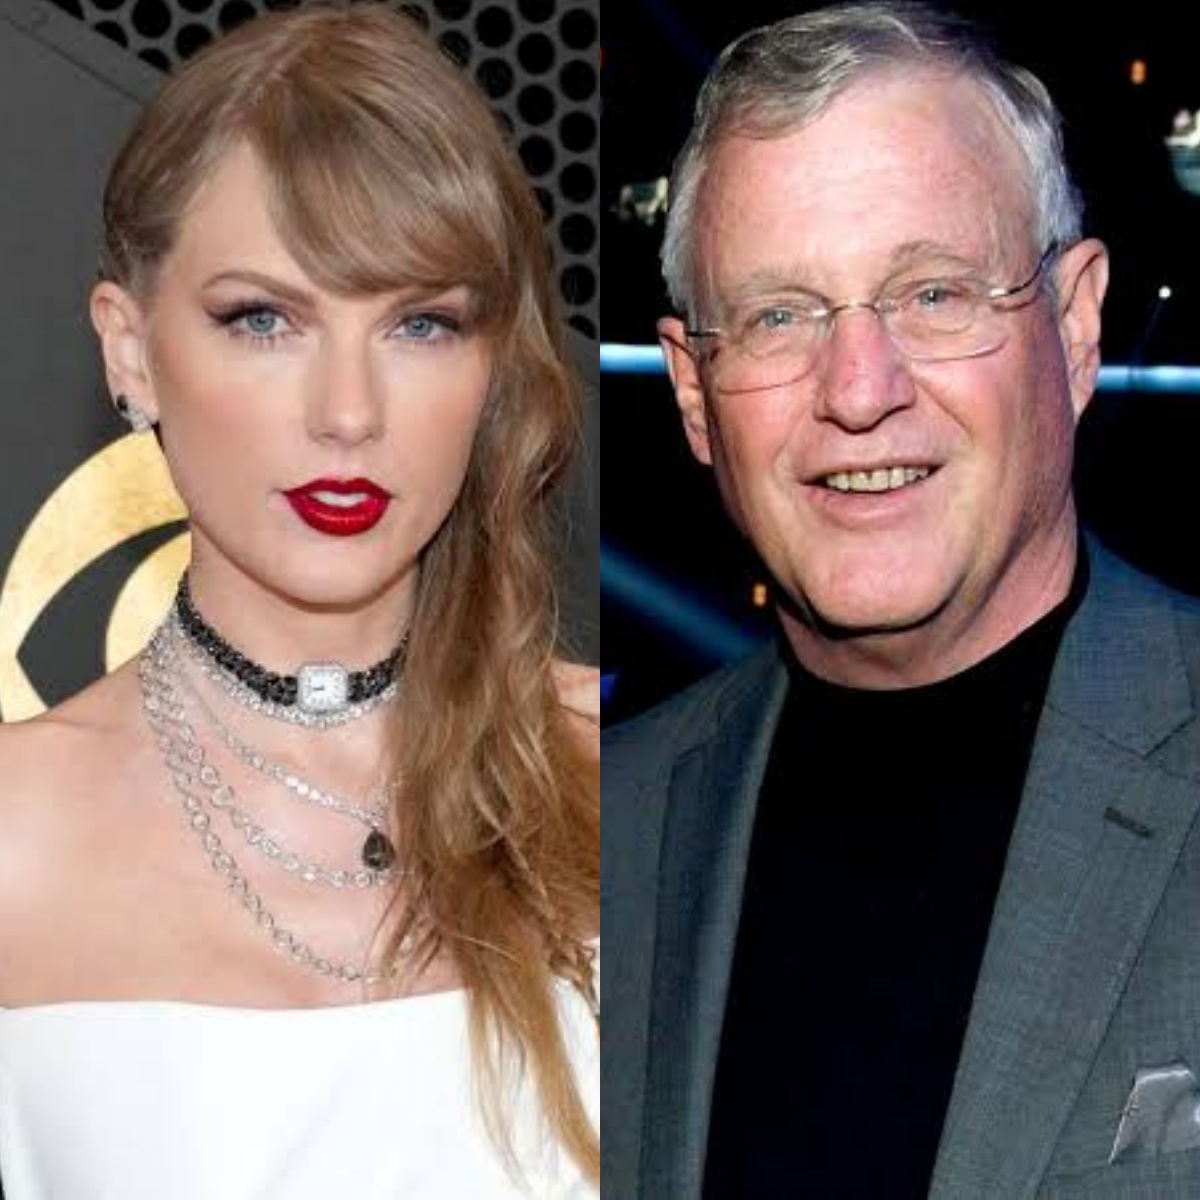 BREAKING NEWS: Taylor Swift’s father, Scott Swift, has reportedly ...